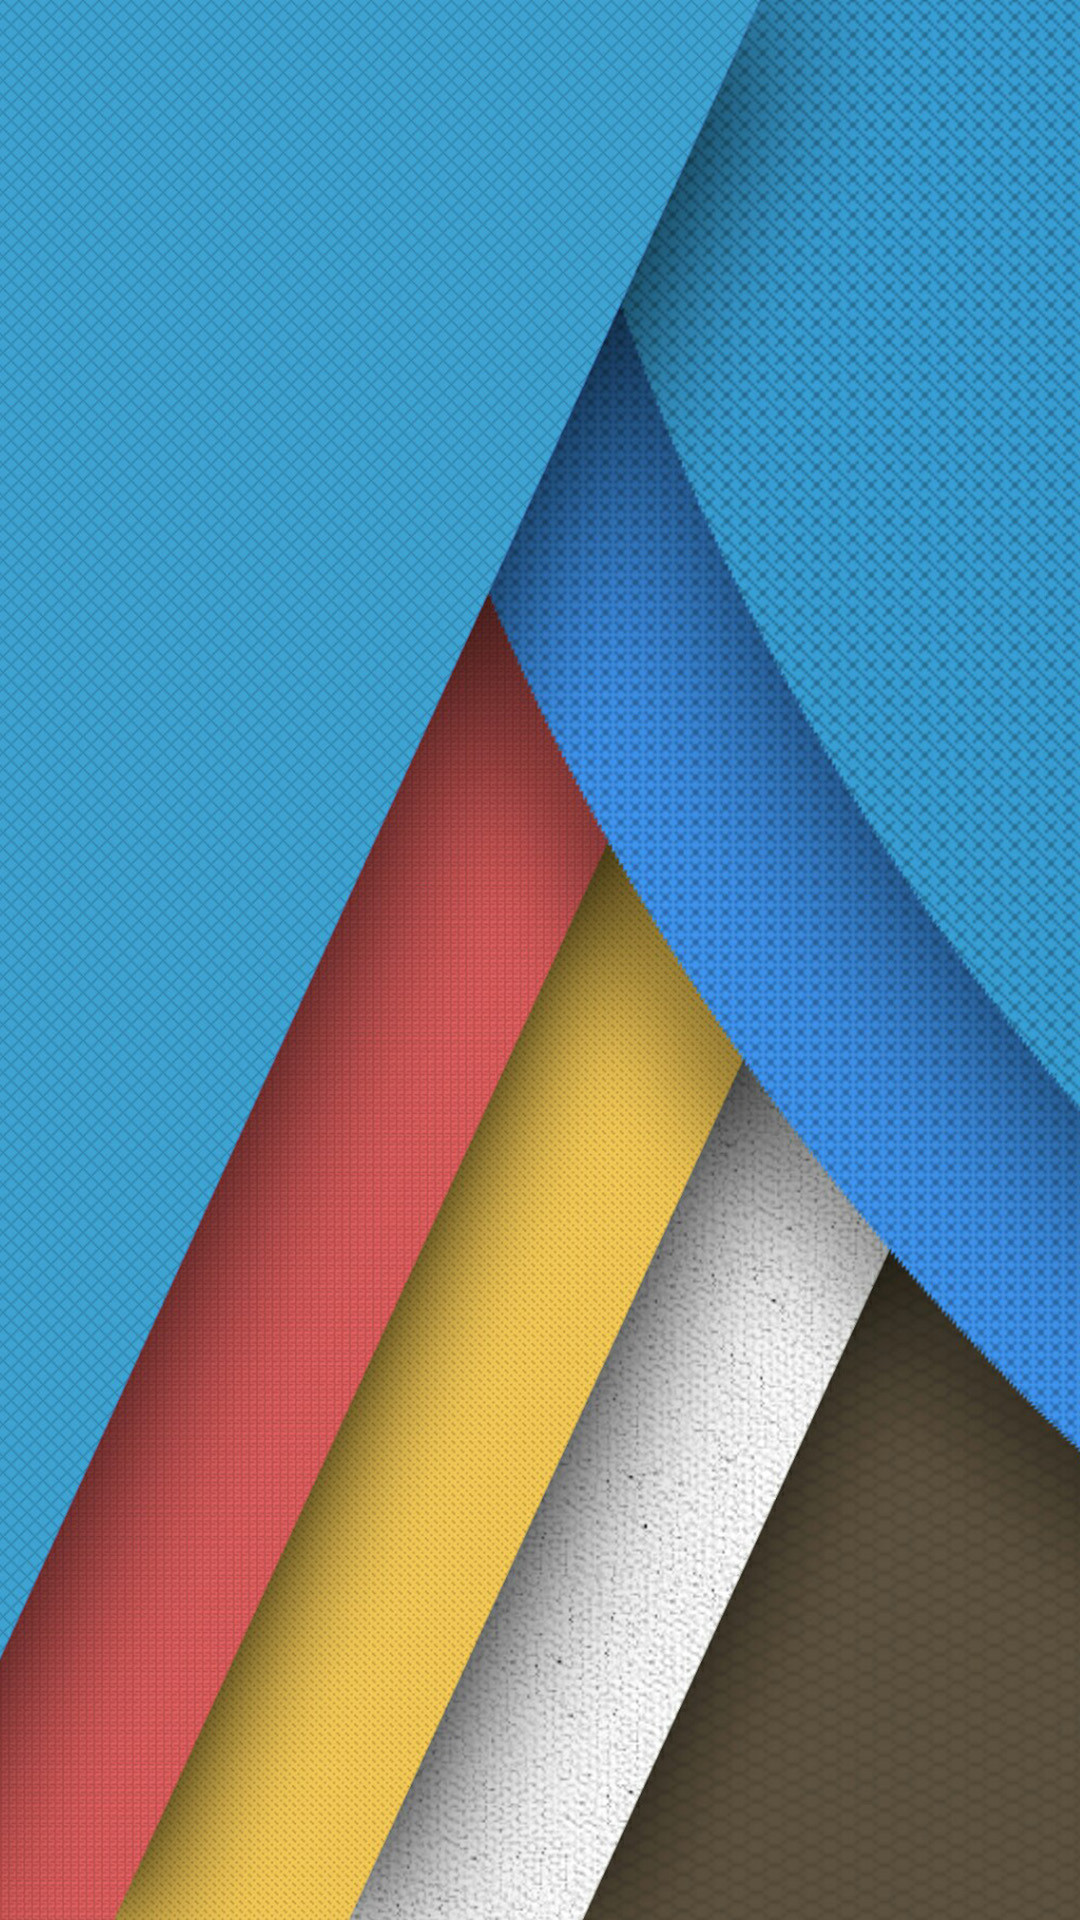 geometric android wallpaper hd